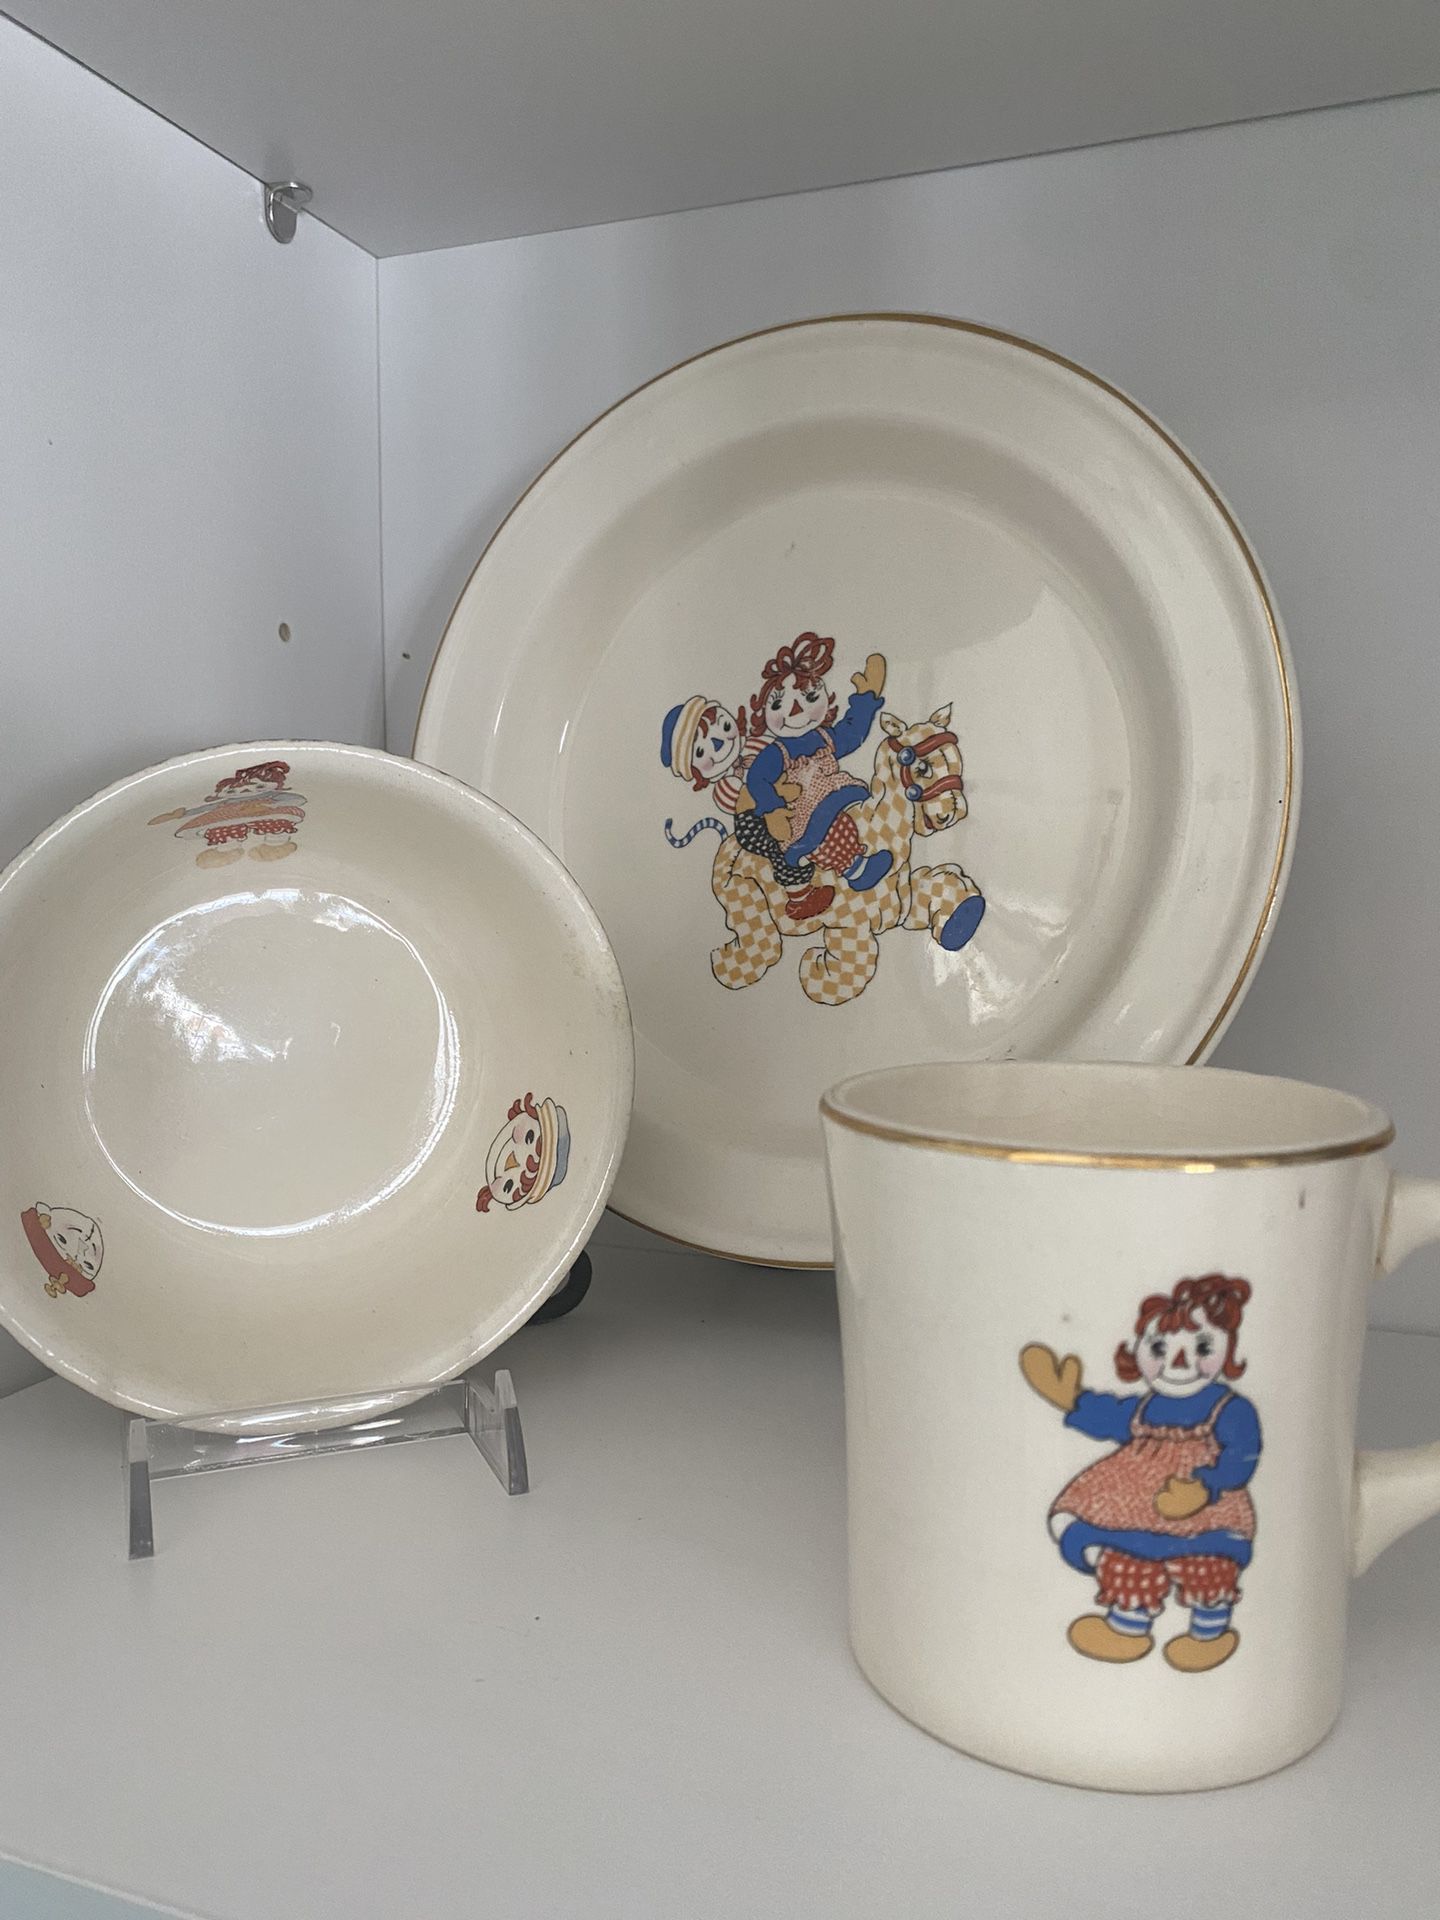 1941 Raggedy Ann And Andy Child Place Setting